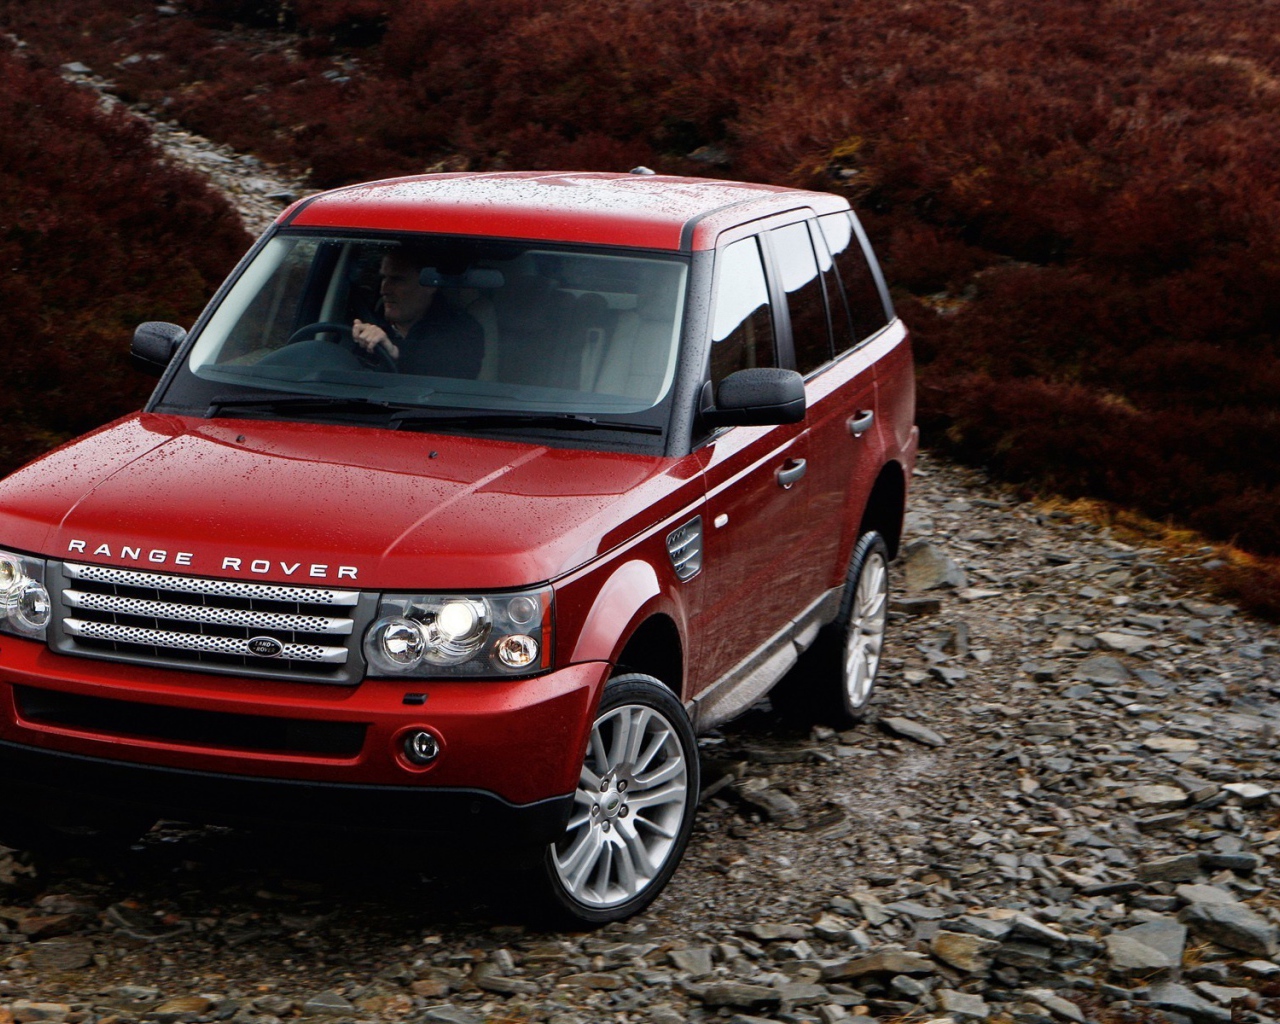 Red Land Rover